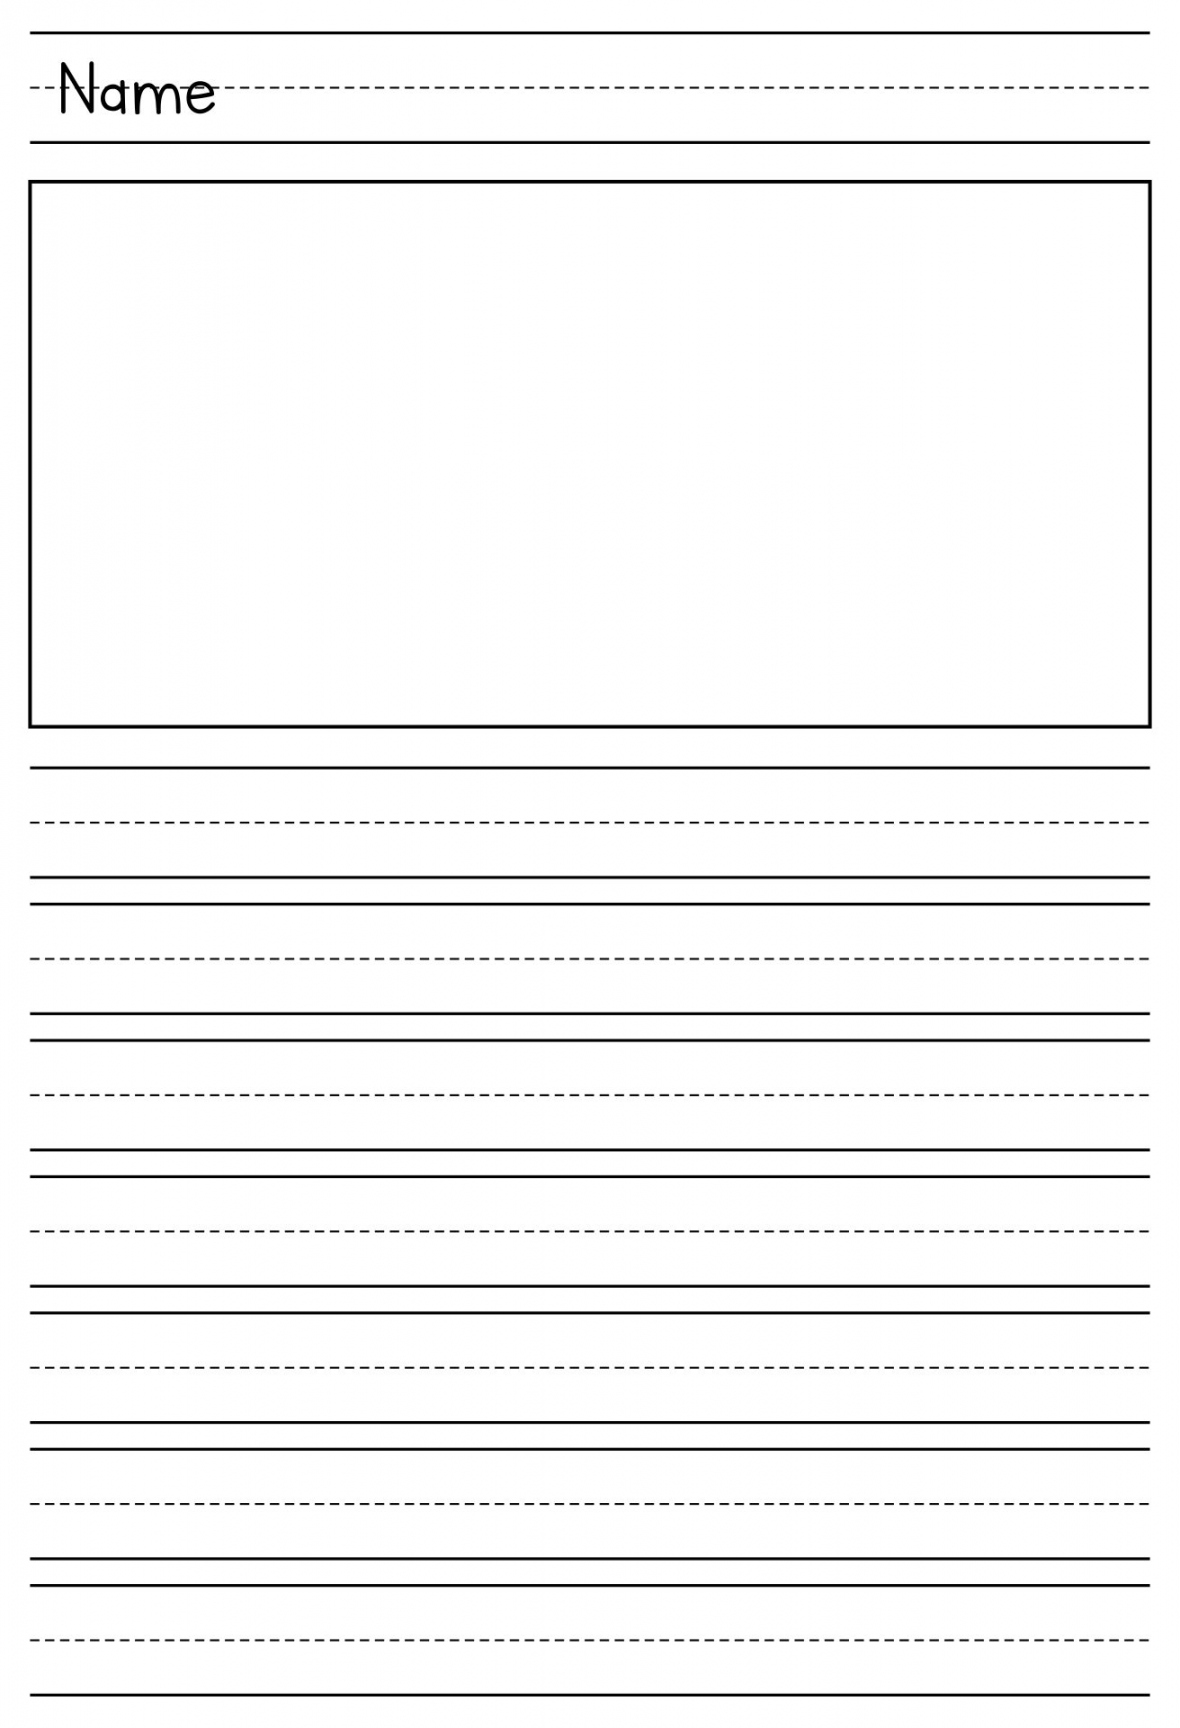 Best Printable Primary Writing Paper Template - printablee - Writing Paper Printable